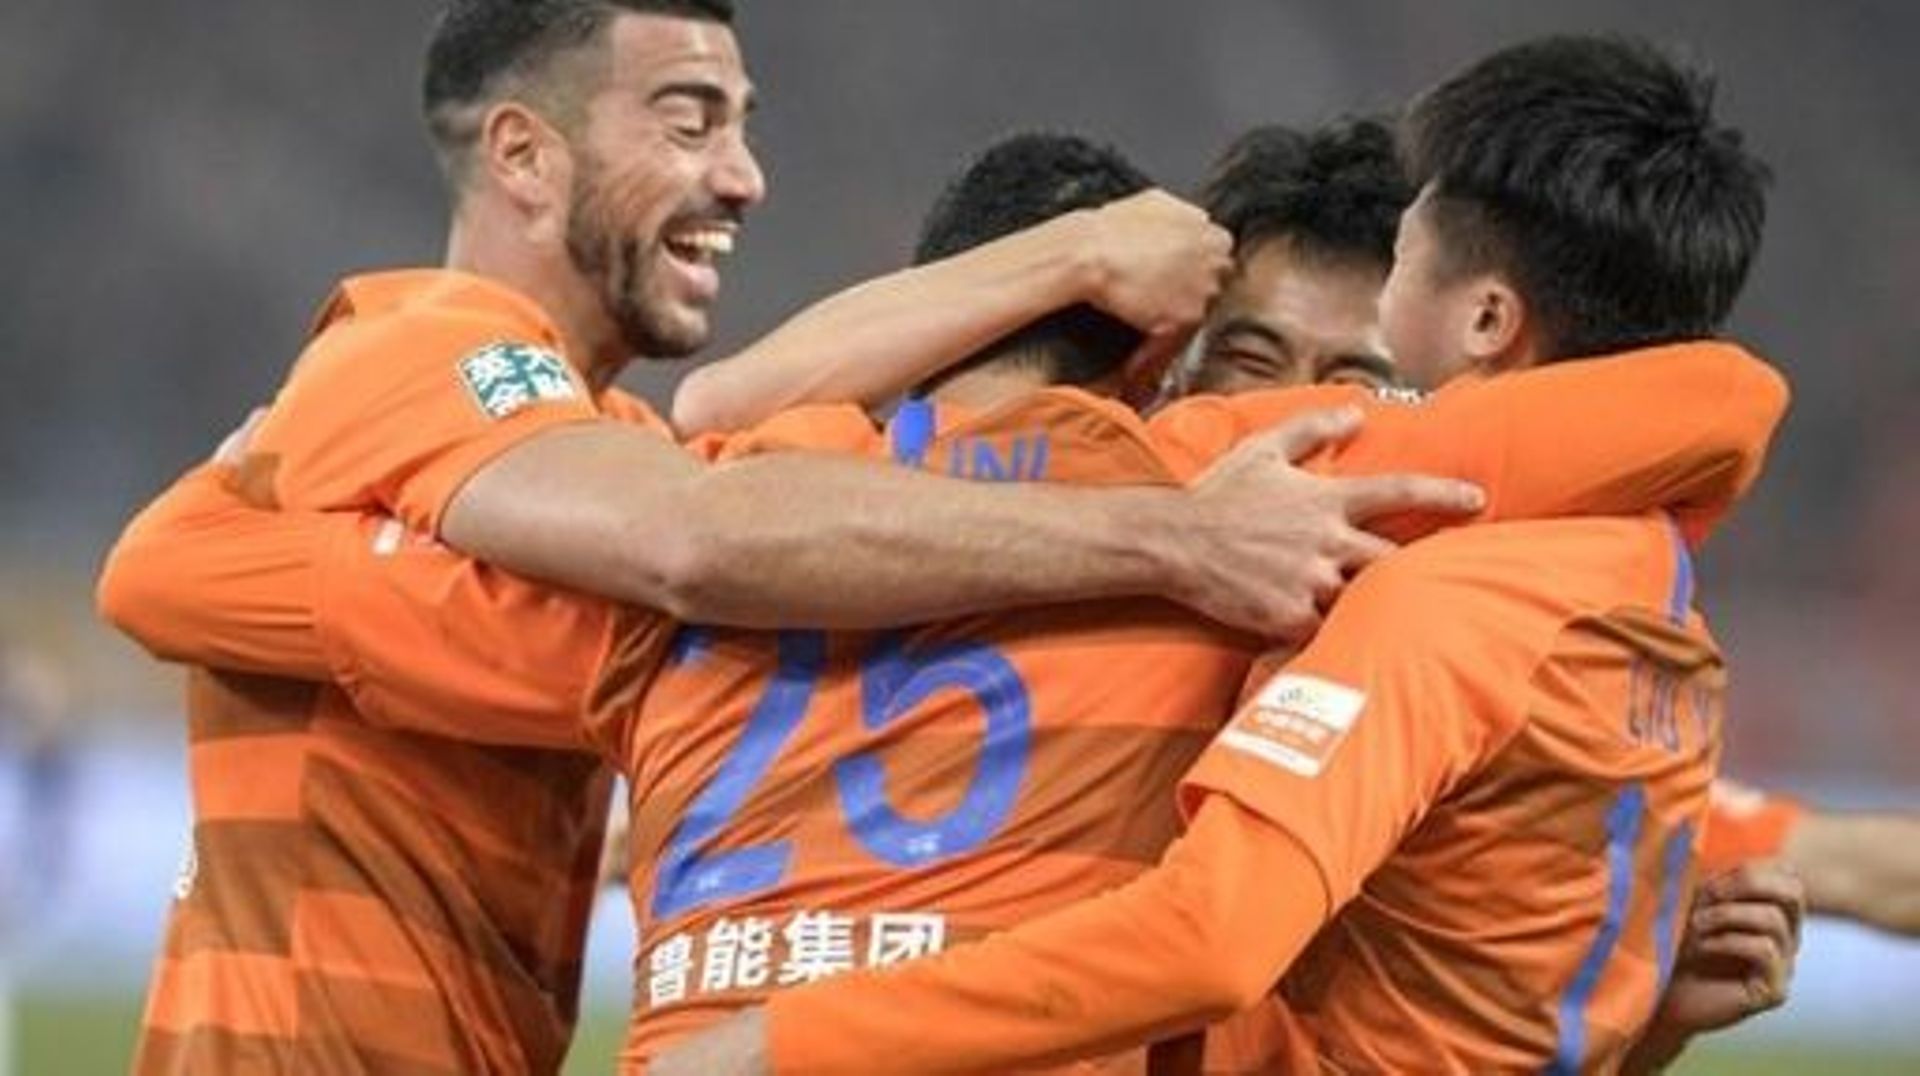 Graziano Pelle (L), Marouane Fellaini (C) and Liu Yang (R) of Shandong Luneng celebrate during the Chinese Super League (CSL) football match between Shandong Luneng and Beijing Renhe in Jinan in China's eastern Shandong province on March 1, 2019. Marouane